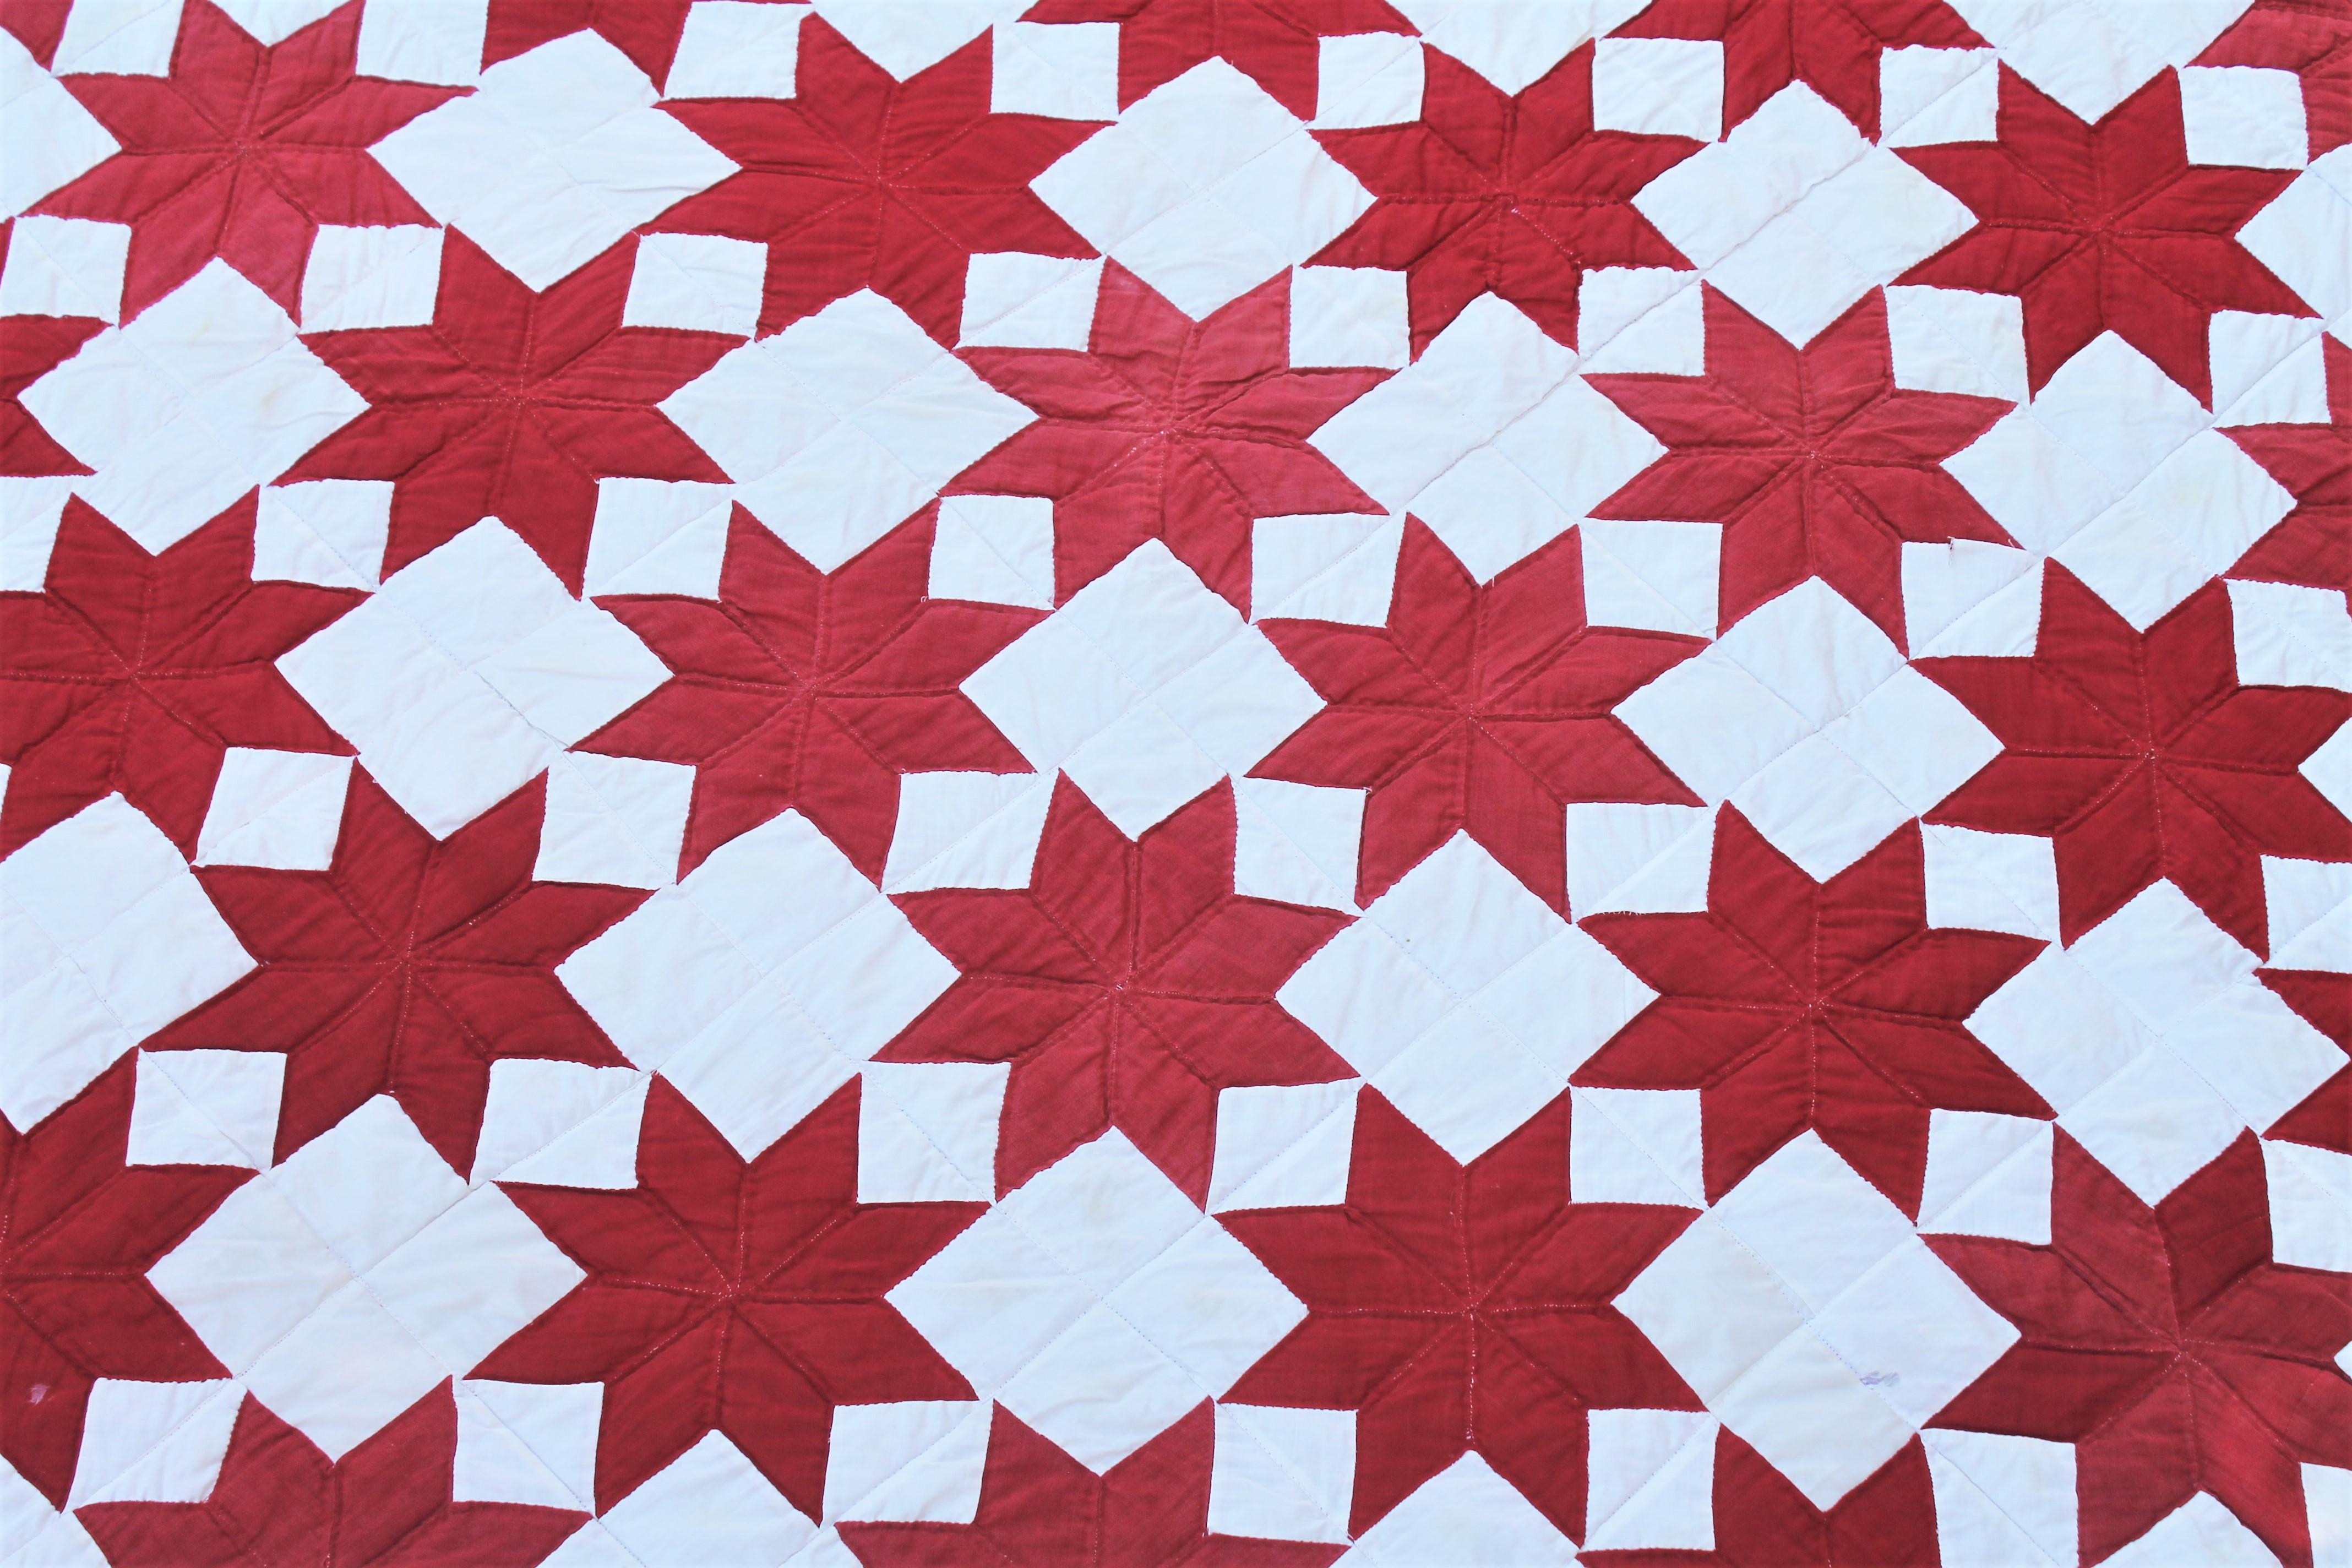 This fun and graphic red and white stars quilt with inner saw tooth border is in good condition. The binding is original to the quilt and the backing is in red fabric. The condition is good.